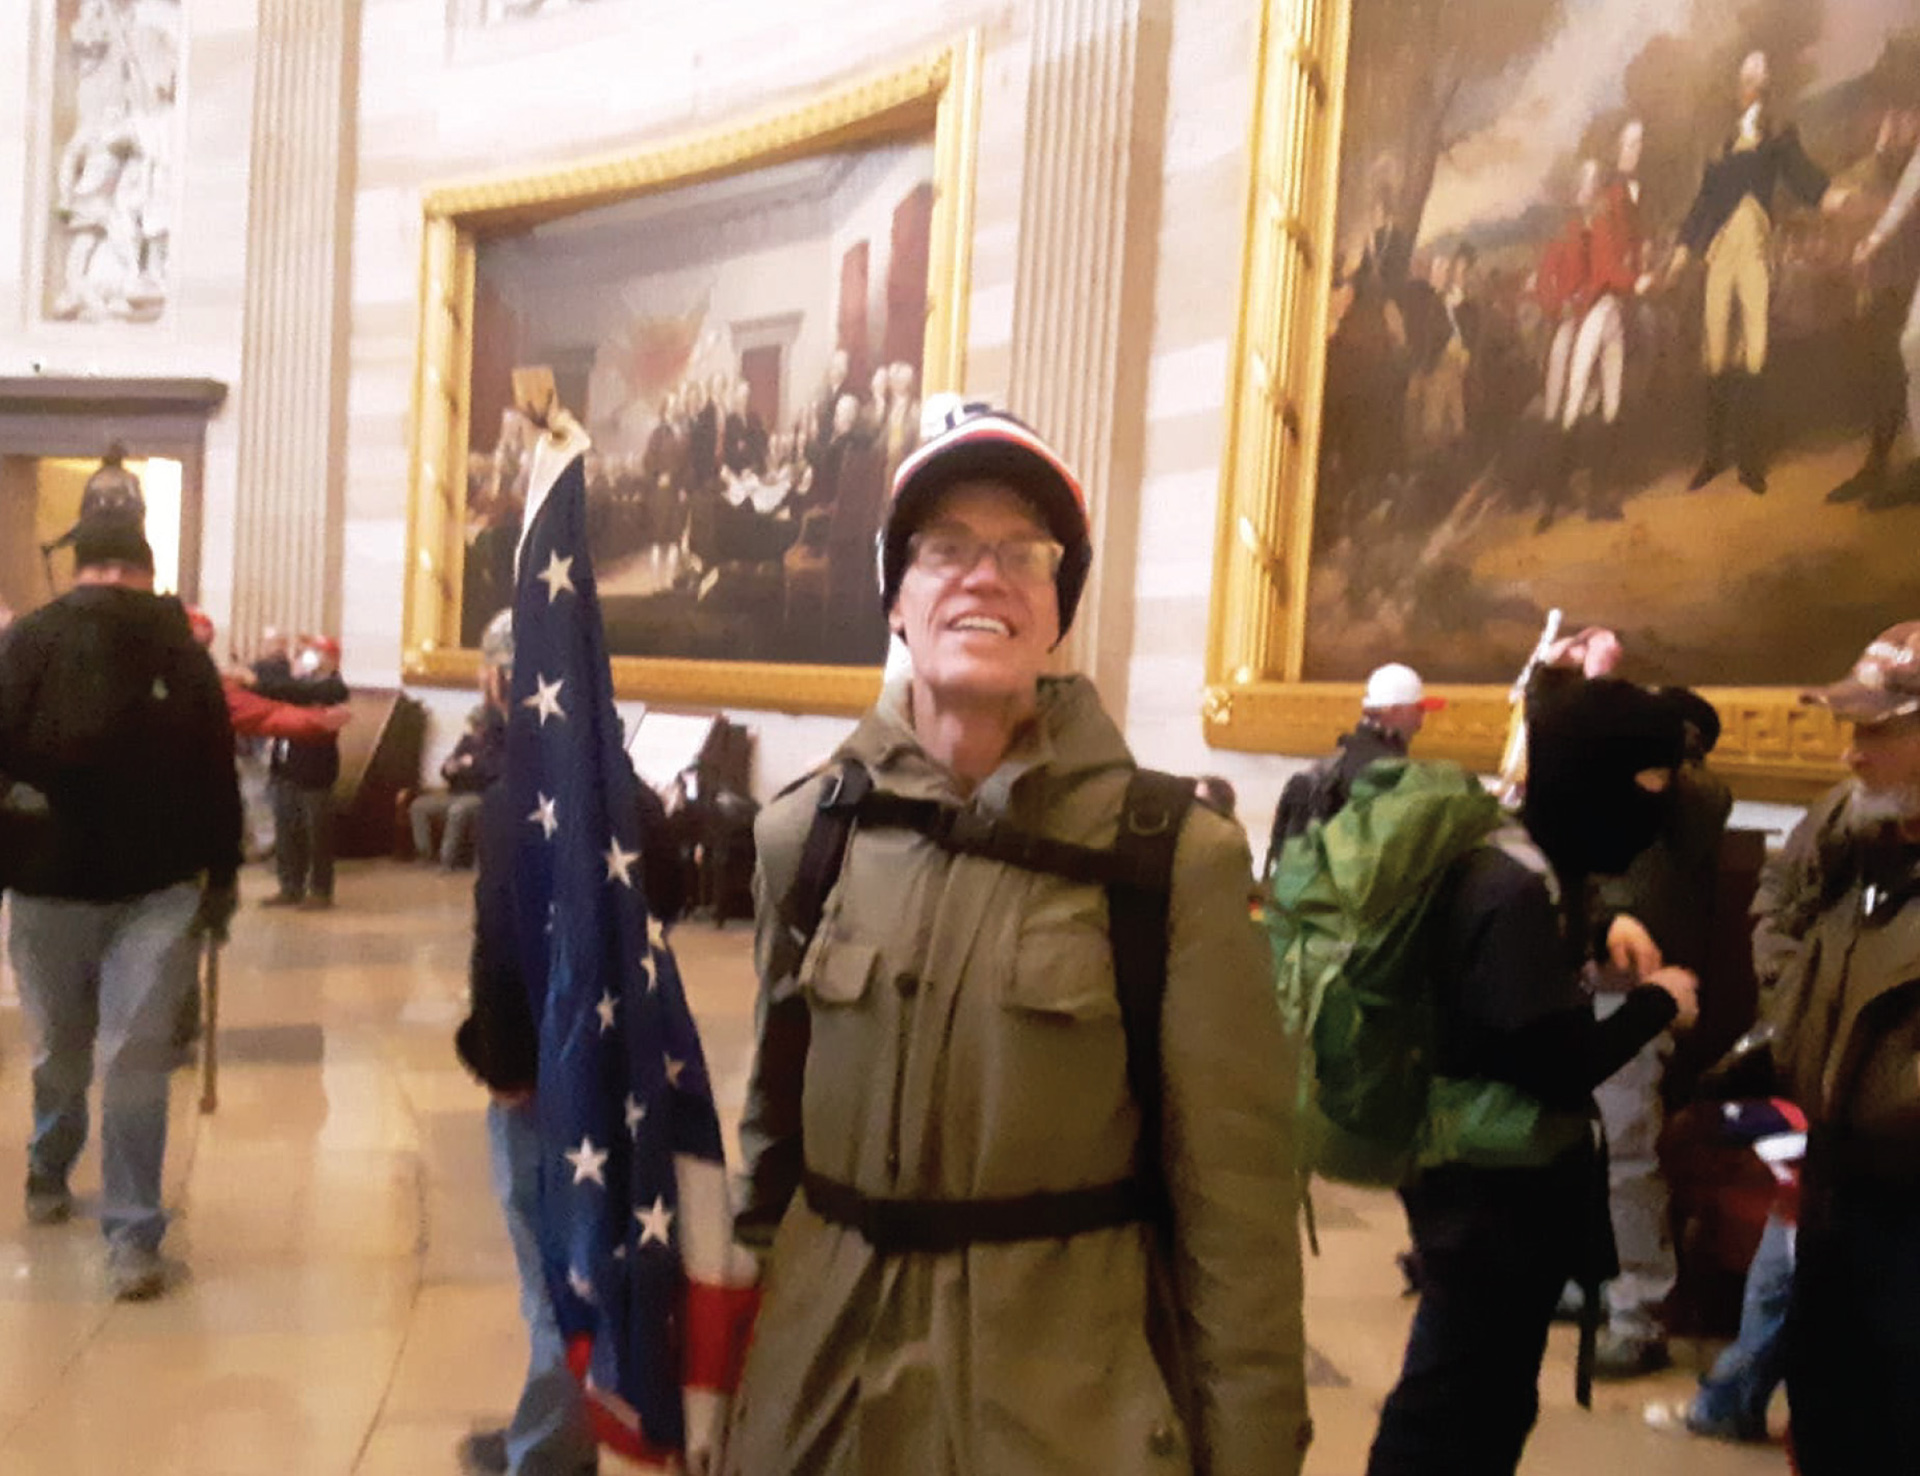 A person identified as Kevin Loftus poses for a photo while holding a U.S. flag while standing inside a room with curved marble masonry walls, a sculpture in a niche above a doorway and two visible paintings — "Declaration of Independence" by "Surrender of General Burgoyne" by John Trumbull — with other people standing and sitting in the background.